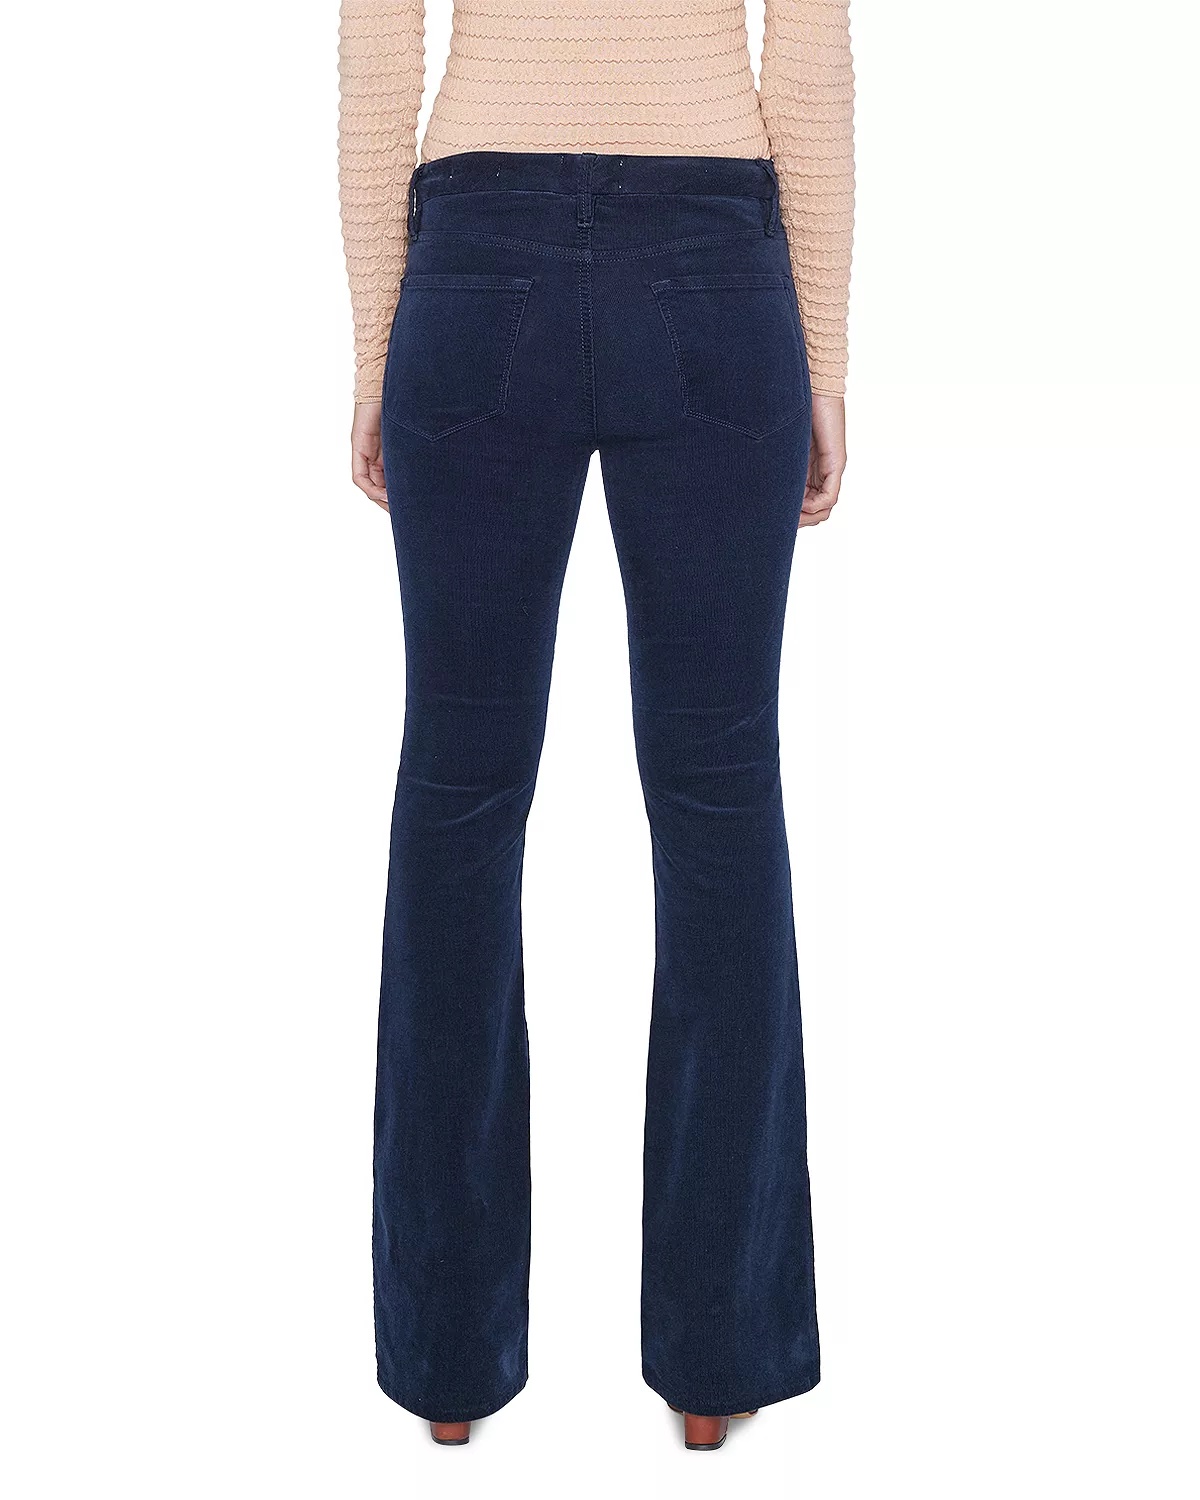 Le Mini High Rise Bootcut Jeans in Navy - 2